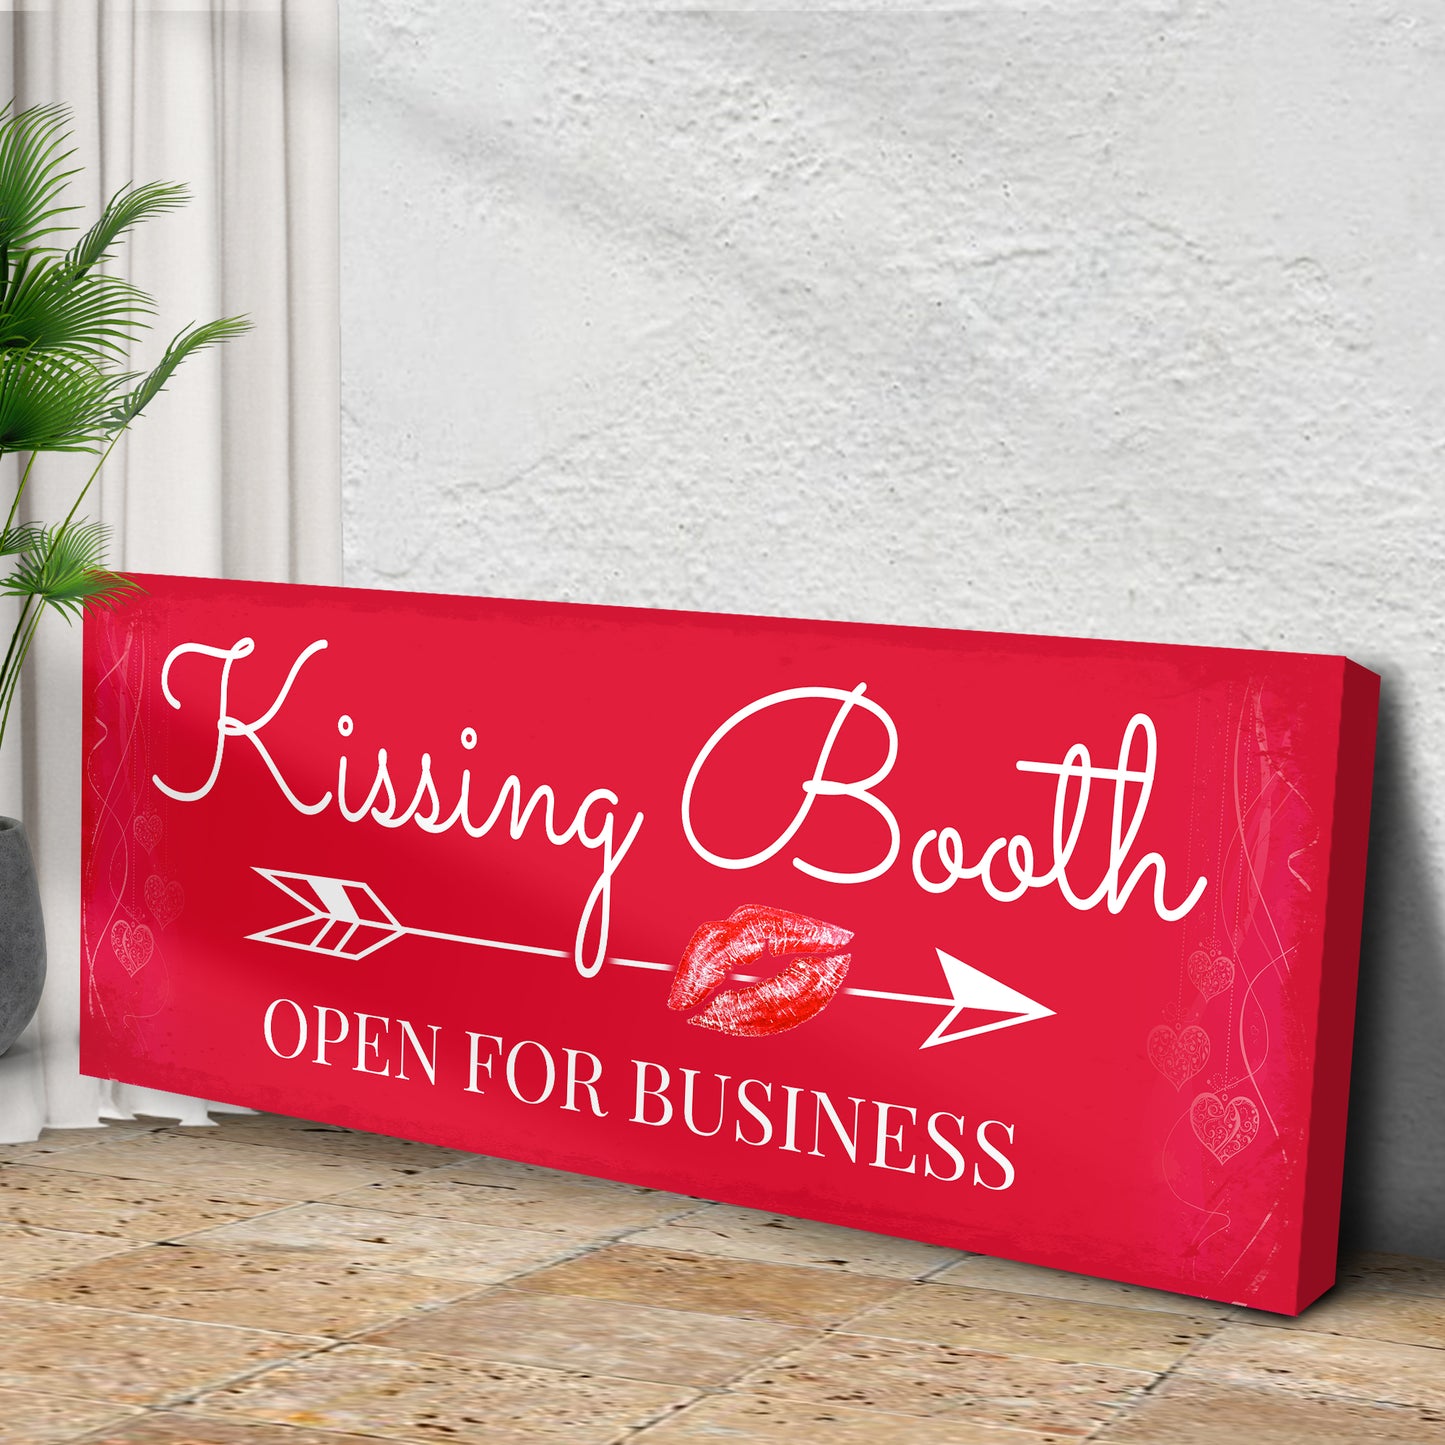 Kissing Booth "Open For Business" Sign Style 2 - Image by Tailored Canvases